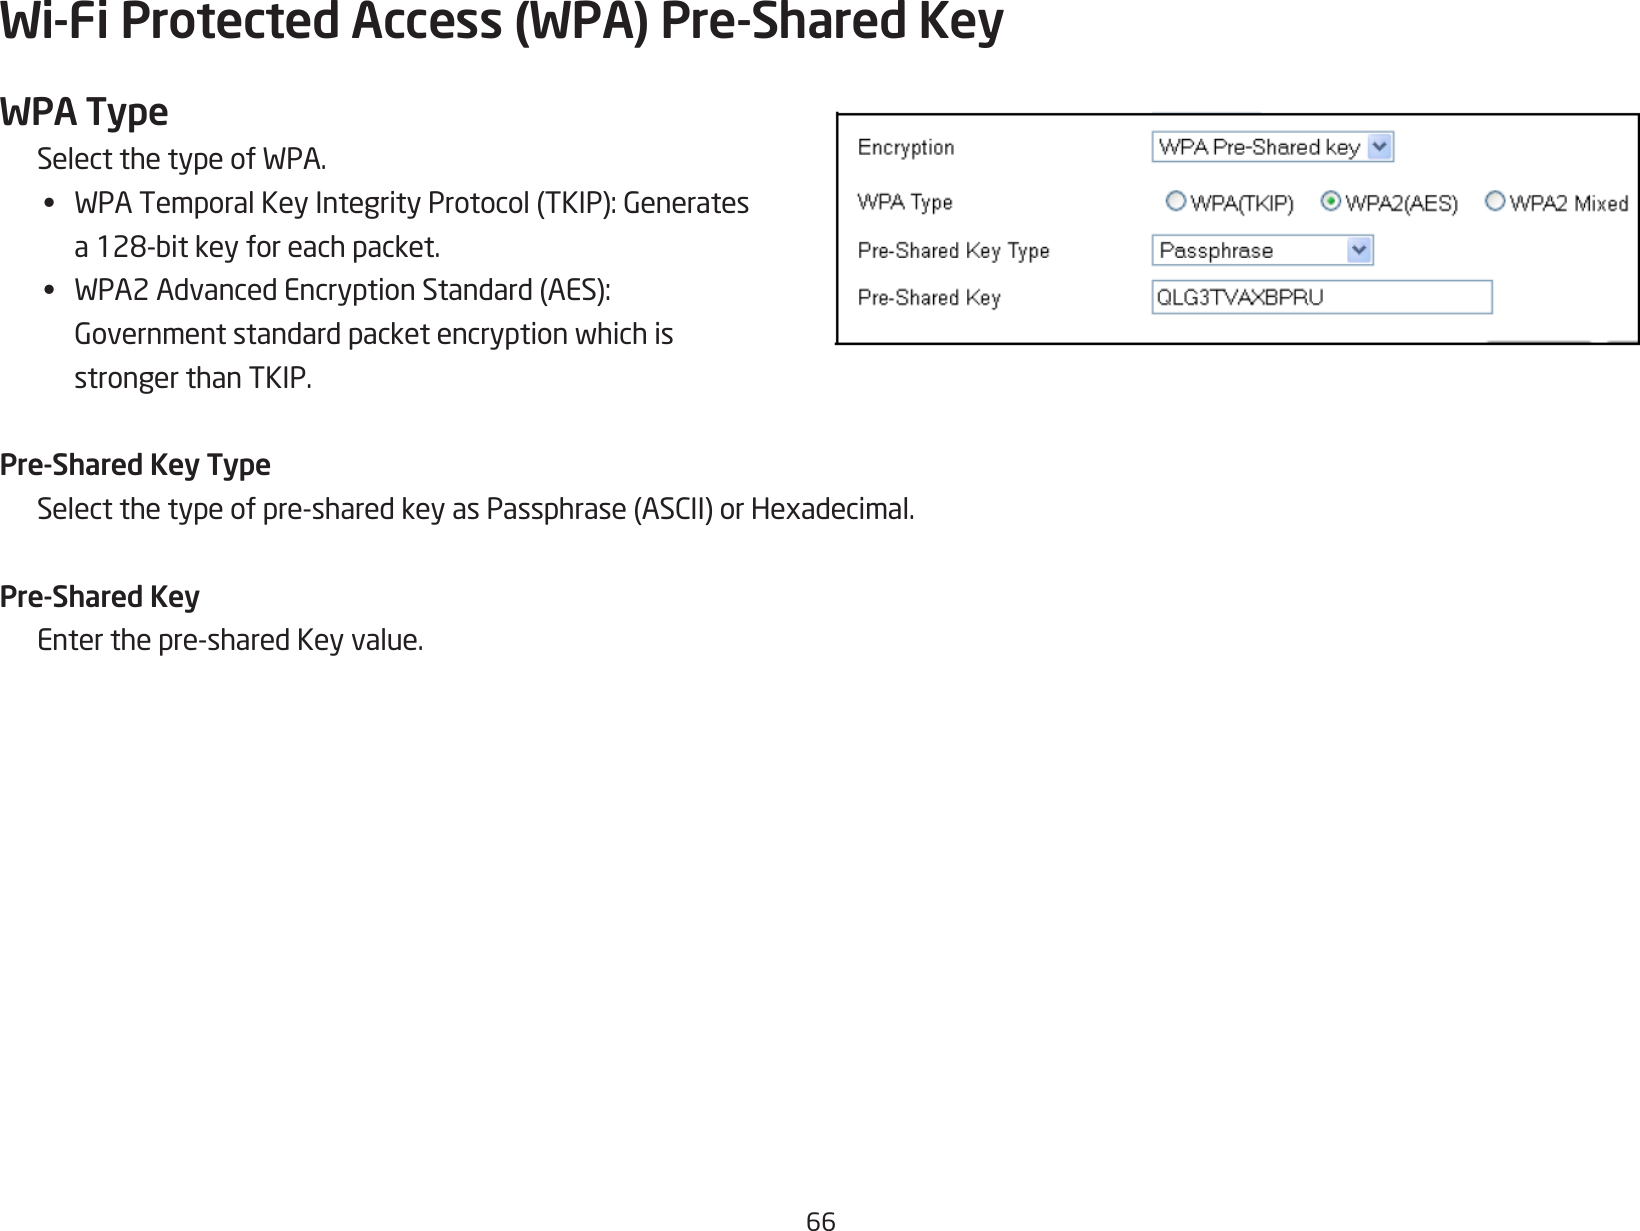 66Wi-Fi Protected Access (WPA) Pre-Shared KeyWPA TypeSelectthetypeofWPA.•  WPATemporalKeyIntegrityProtocol(TKIP):Generates a128-bitkeyforeachpacket.•  WPA2AdvancedEncryptionStandard(AES): Governmentstandardpacketencryptionwhichis  stronger than TKIP.Pre-Shared Key TypeSelectthetypeofpre-sharedkeyasPassphrase(ASCII)orHexadecimal.Pre-Shared KeyEnterthepre-sharedKeyvalue.